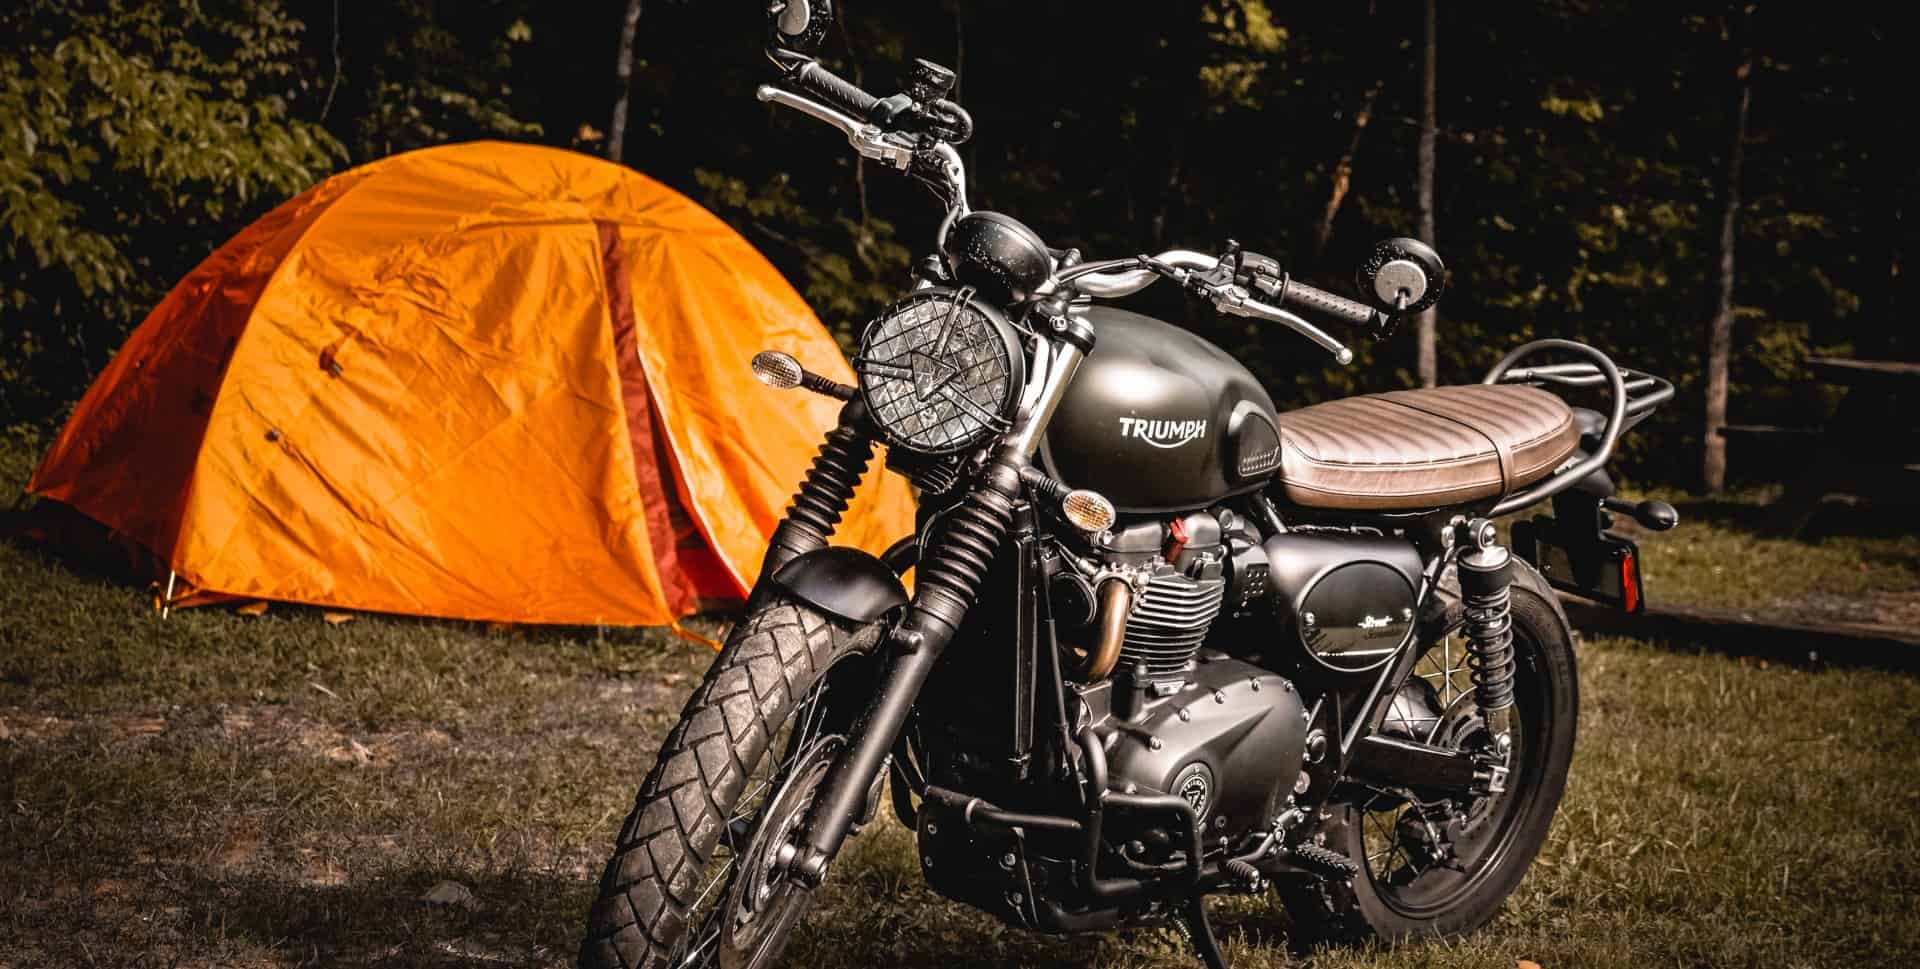 Triumph motorcycle outside an orange motorcycle camping tent in a campsite